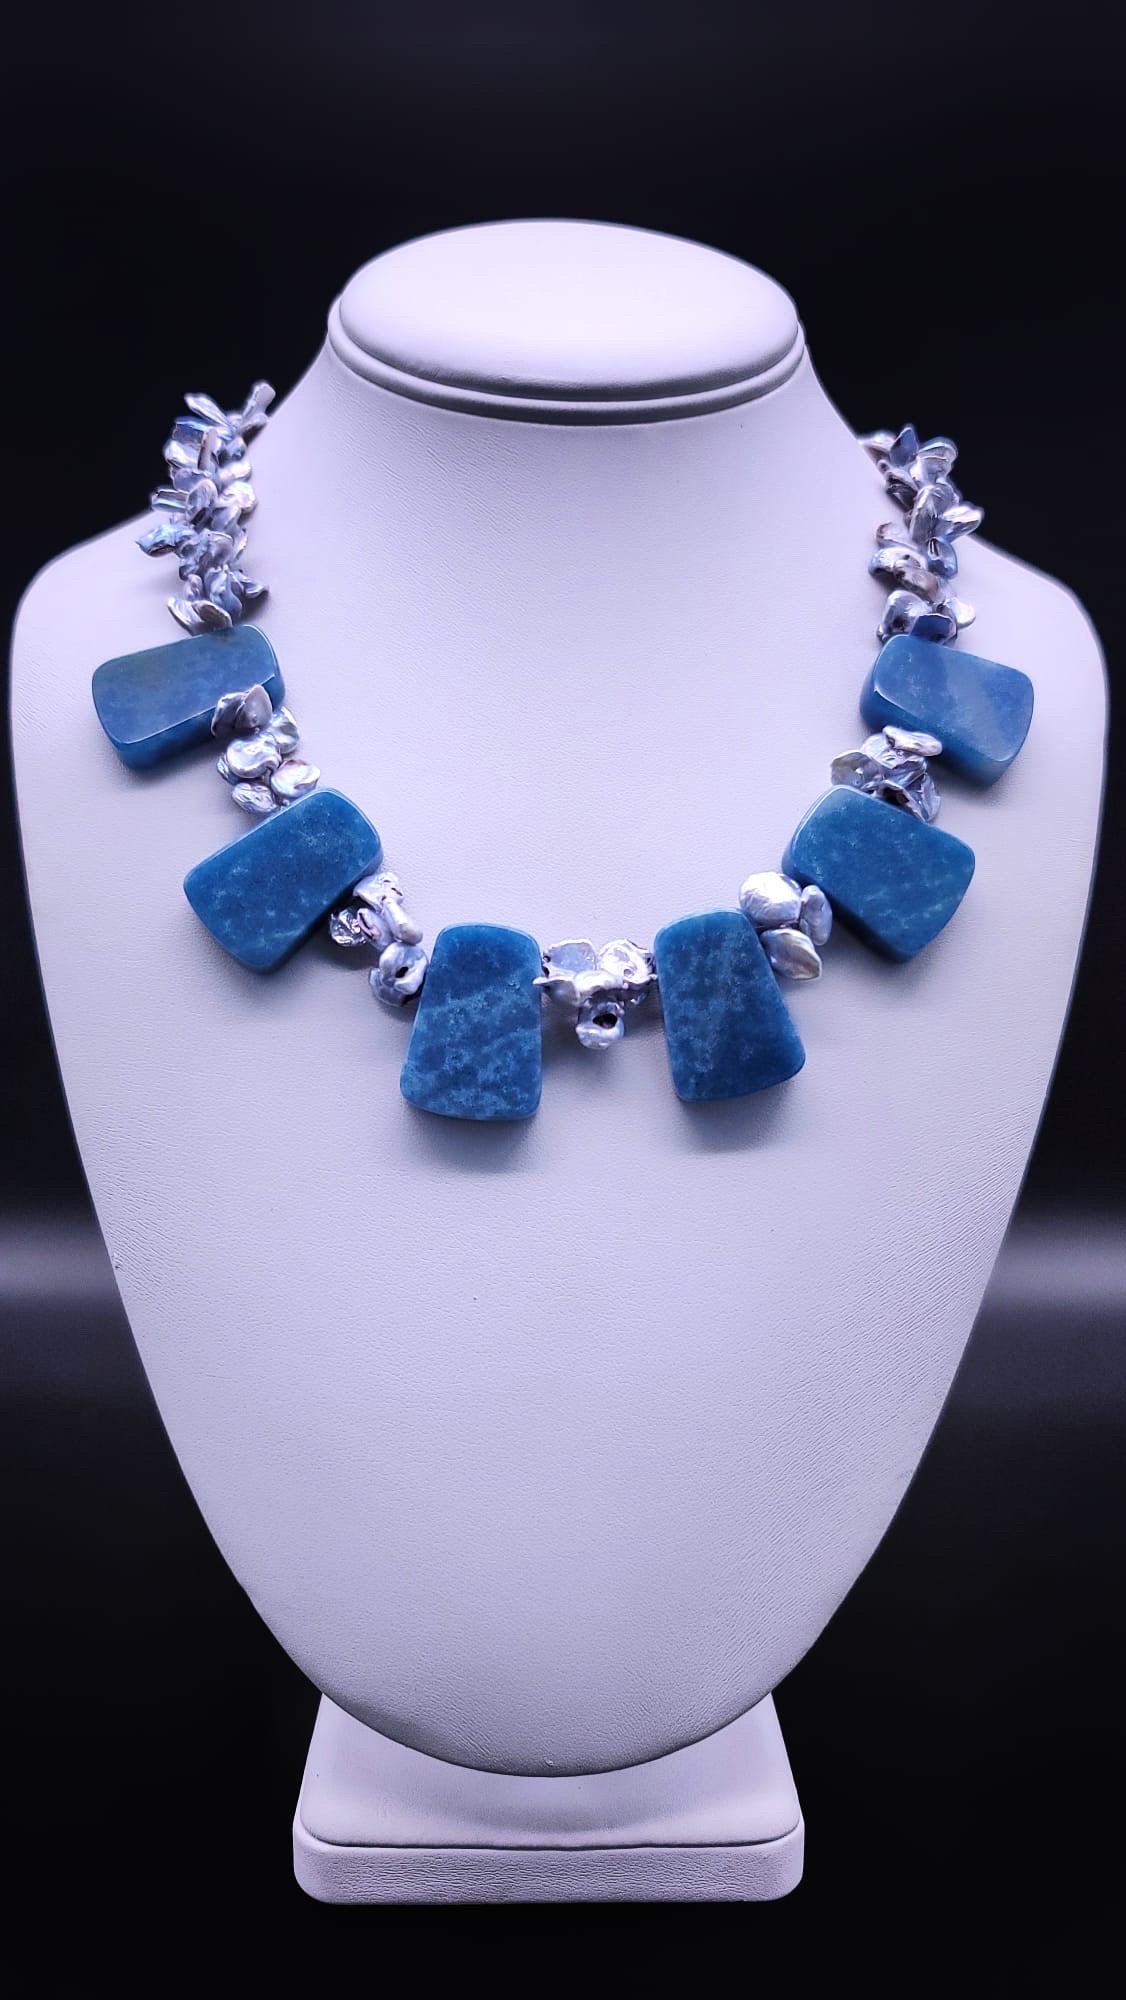 One-of-a-Kind

Indulge in the heavenly beauty of this stunning blue quartz necklace mixed with blue baroque pearls. Each stone complements the other, creating a unique and interesting mix that is sure to turn heads.
The highly polished blue quartz